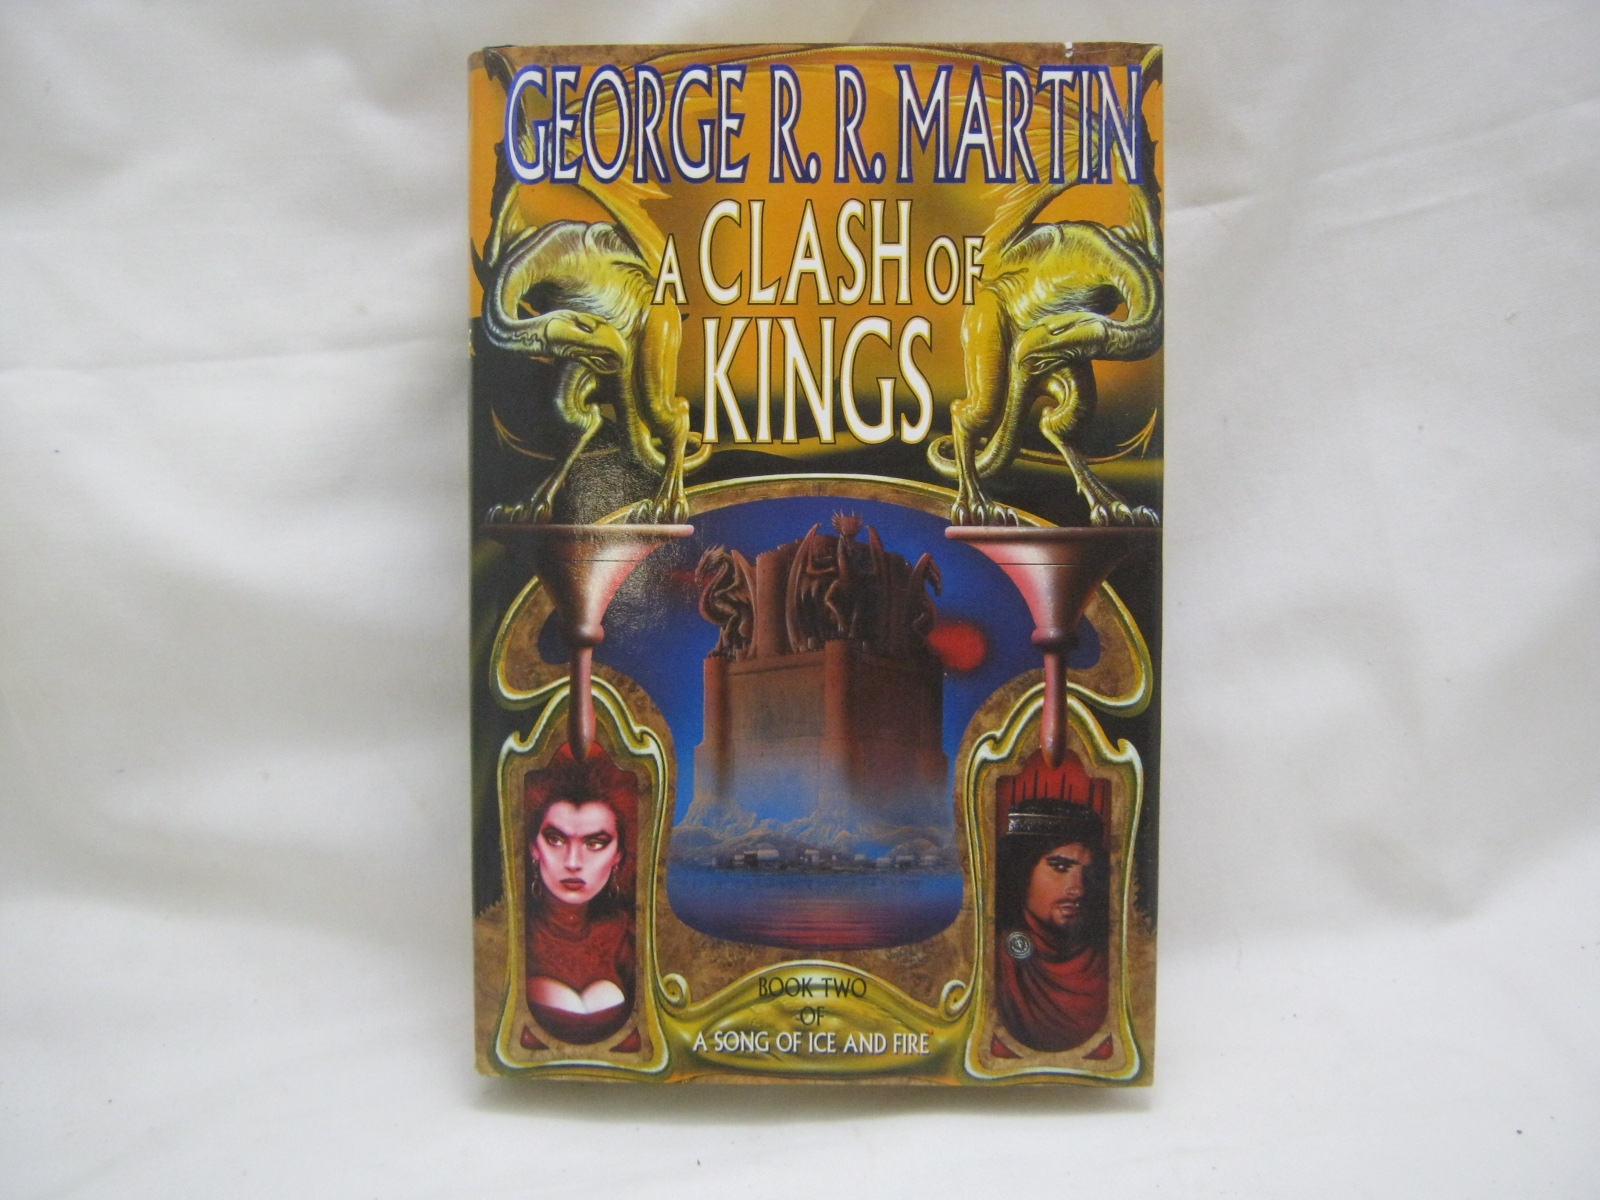 GEORGE R R MARTIN: A CLASH OF KINGS, 1998 1st edn, orig cl d/w